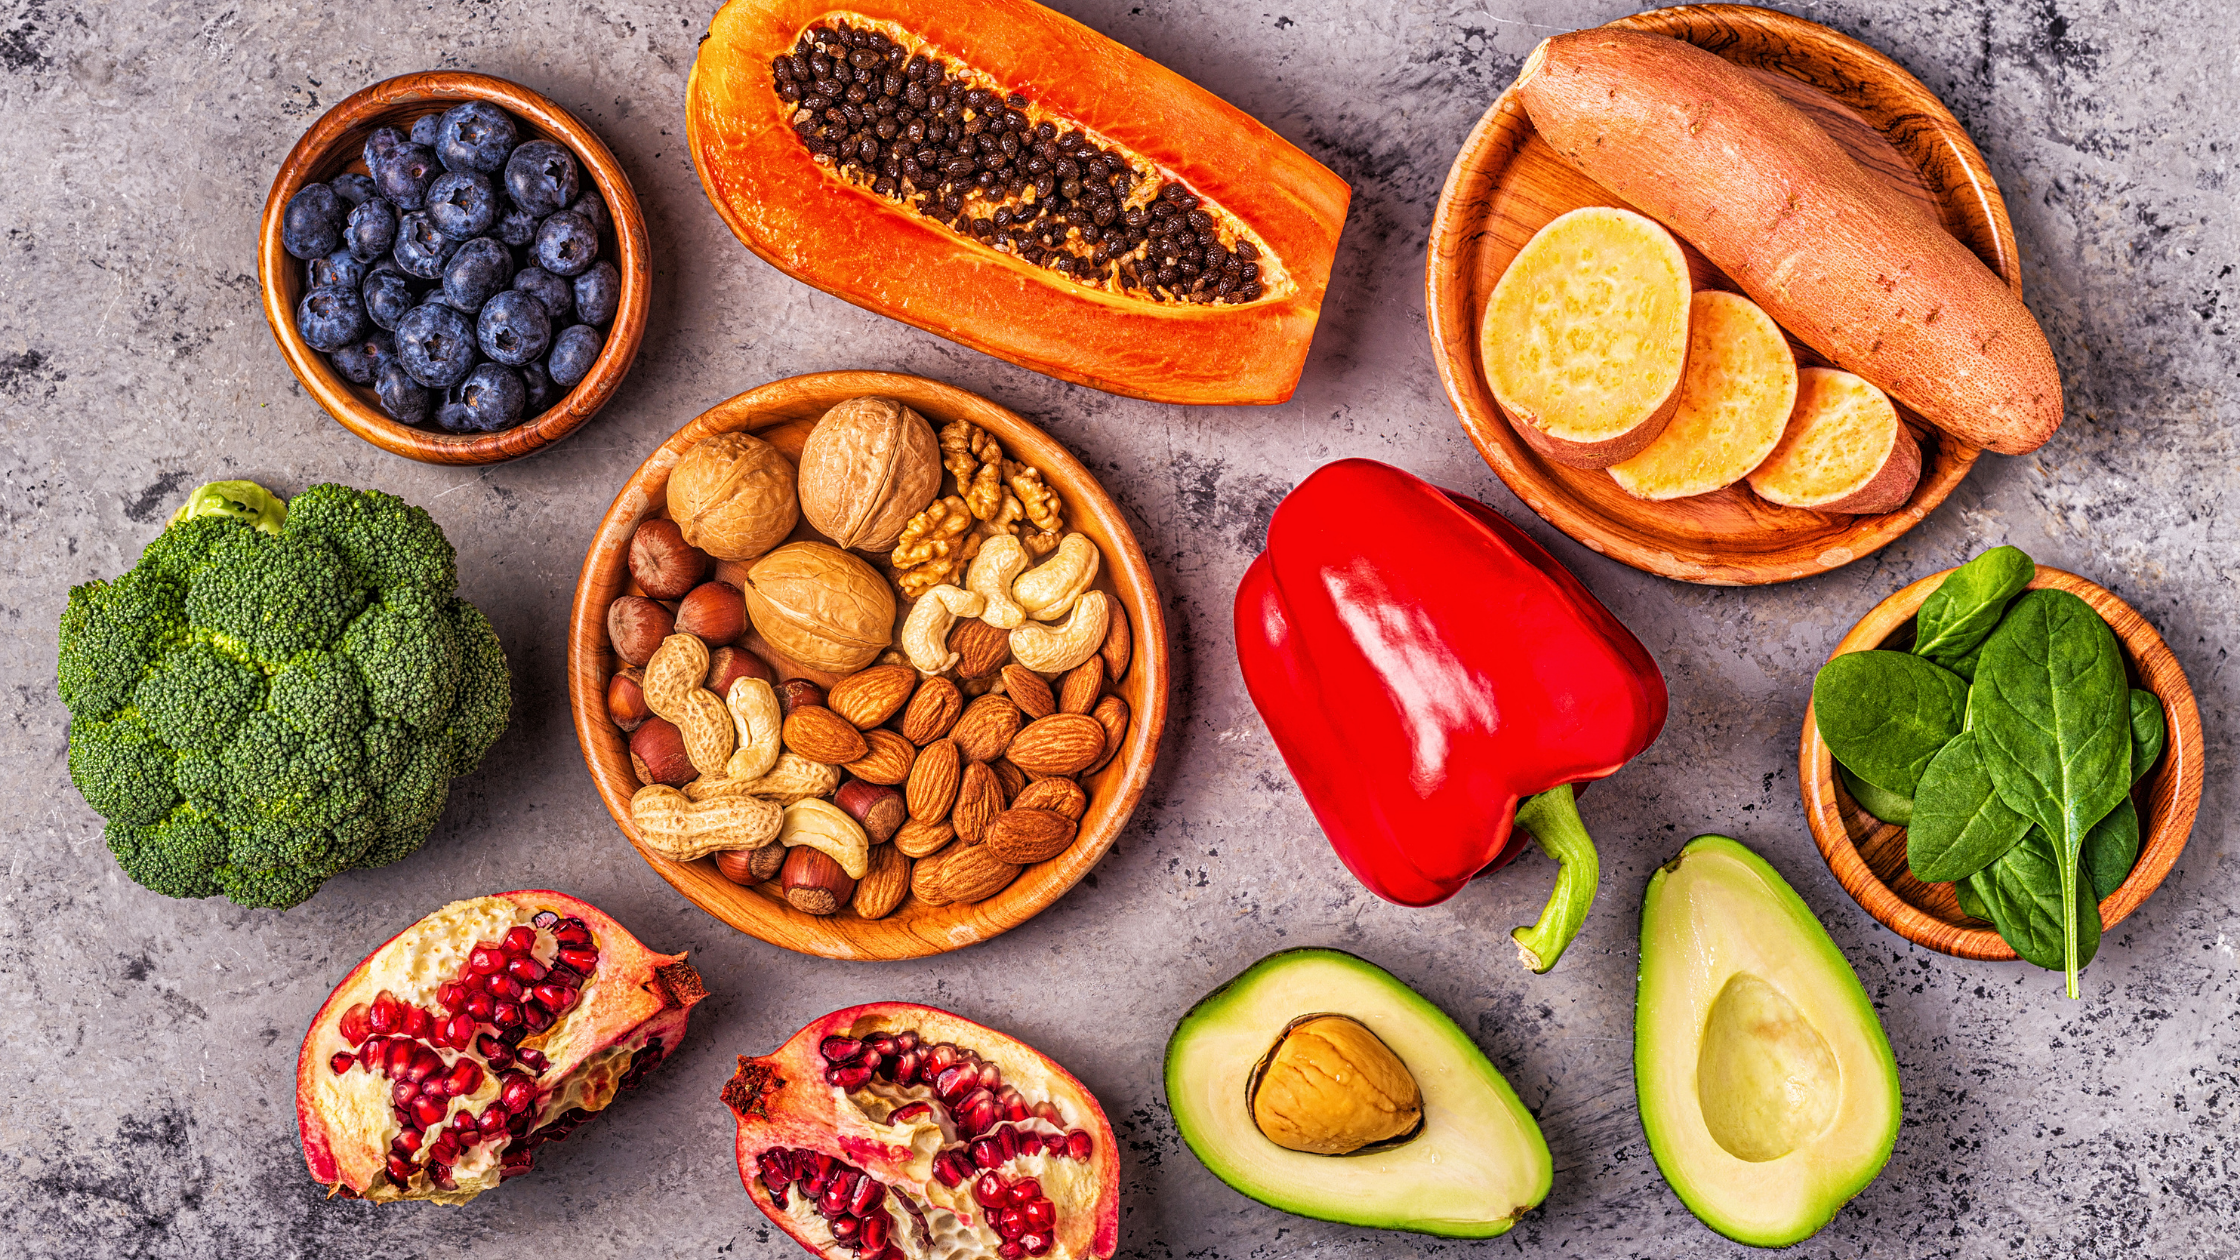 Various healthy-looking foods, avocados, broccoli, red pepper, blueberries, nuts